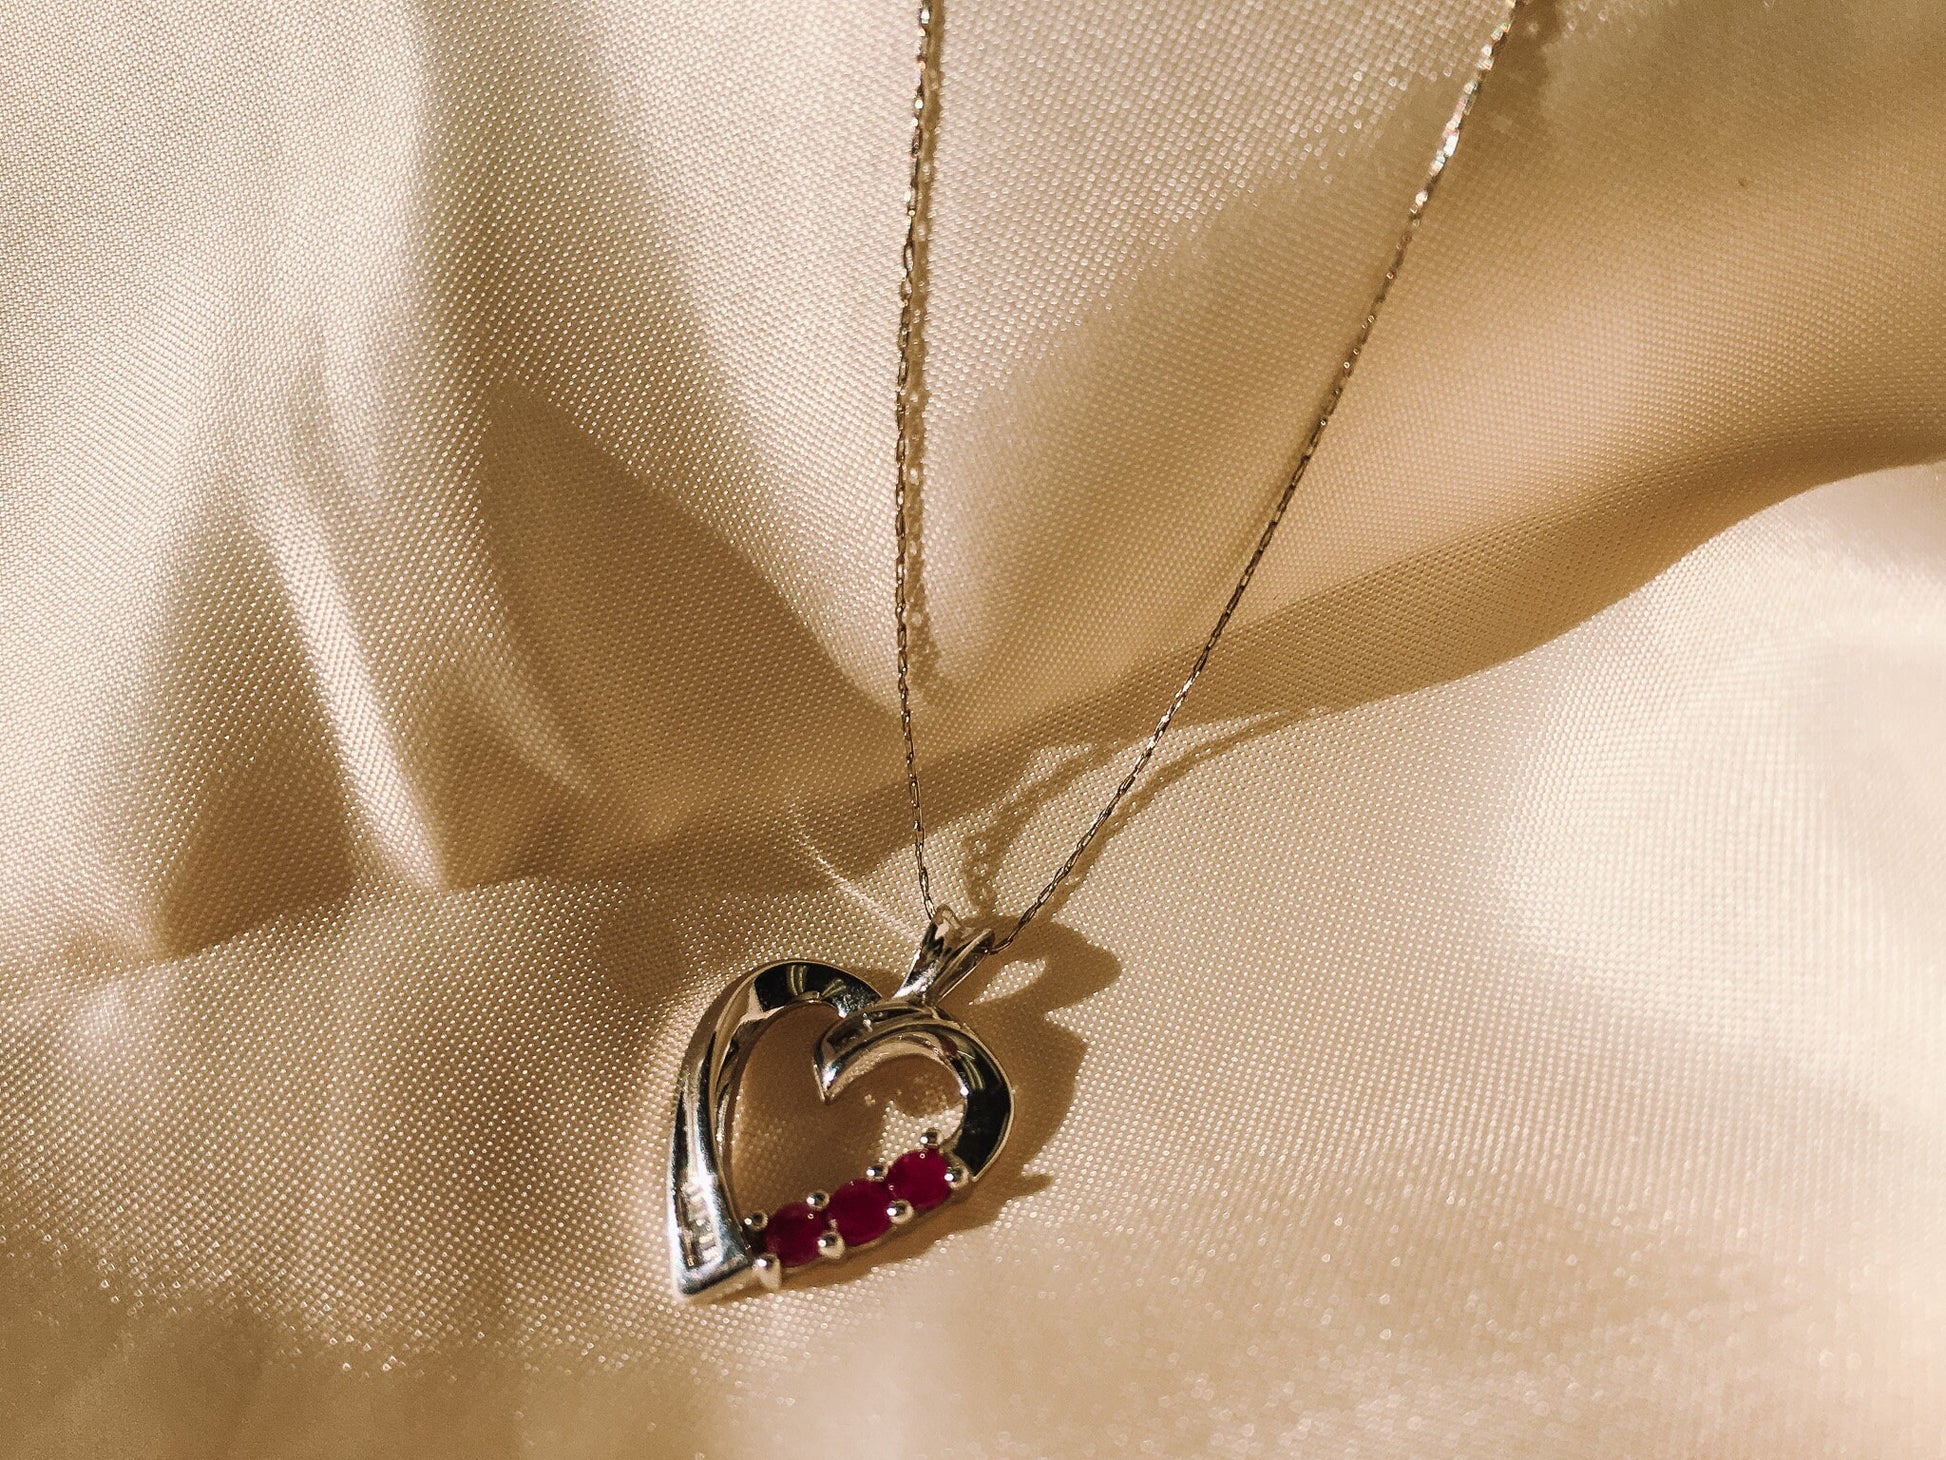 10k White Gold THL Open Heart Pendant Necklace with Ruby and Diamond Chip